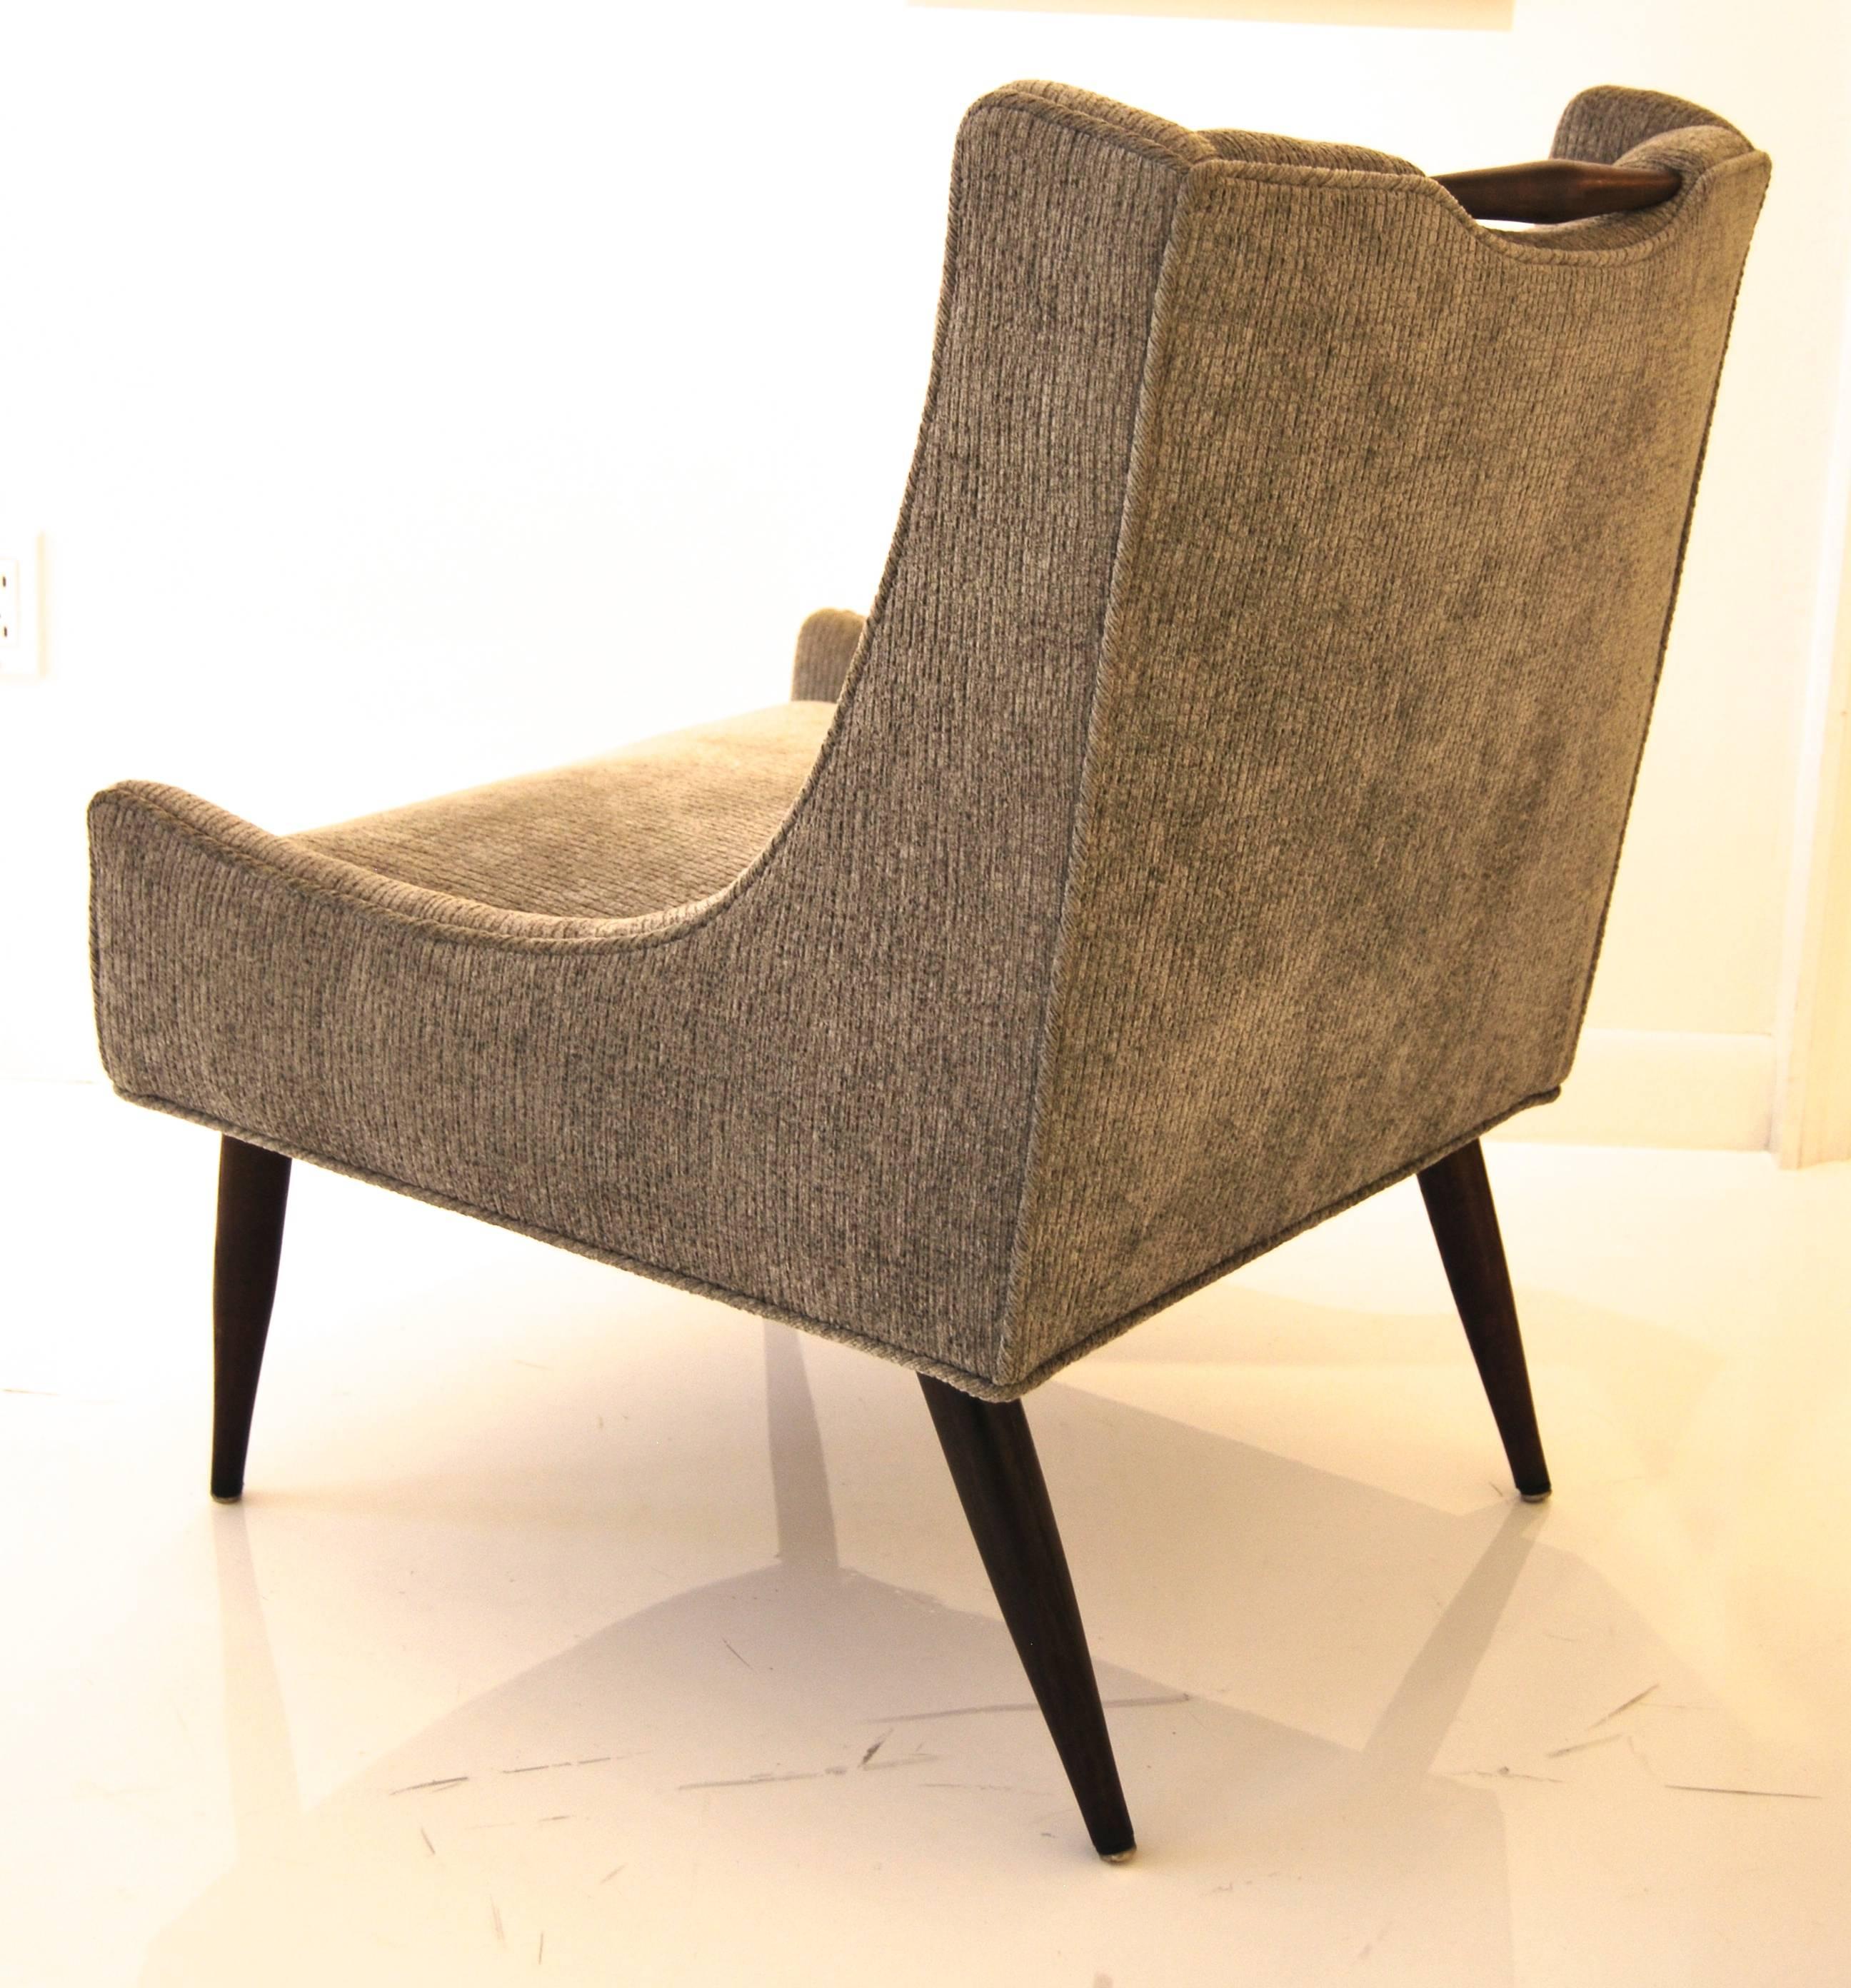 Elegant pair of slipper chairs by Harvey Probber, upholstered in charcoal grey chenille with exposed walnut handle.